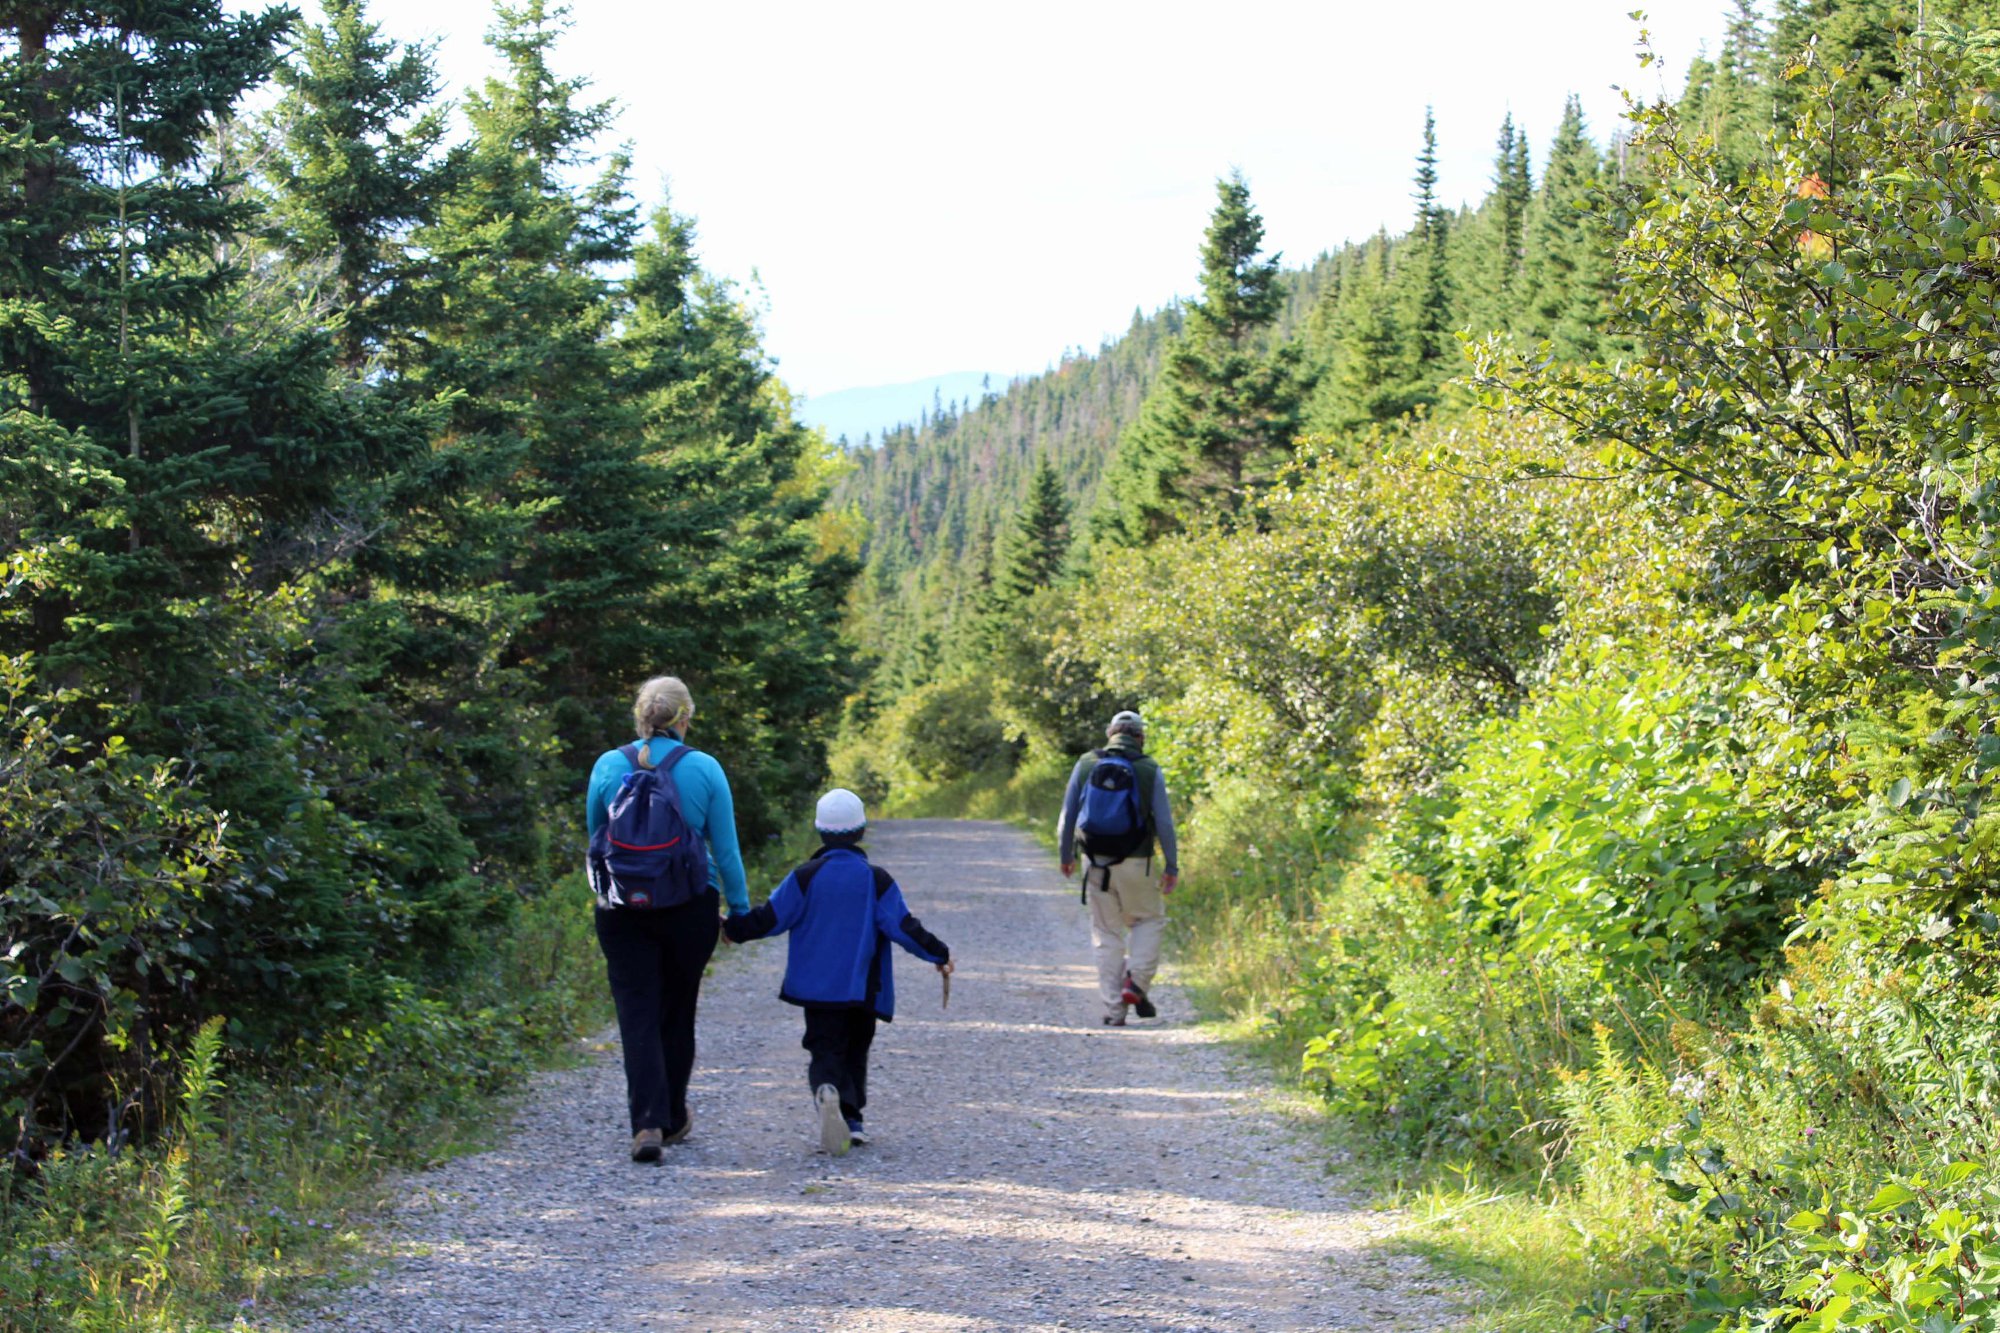 Hiking in Forillon National Park, Canada October 27, 2015 at 12:00 PM